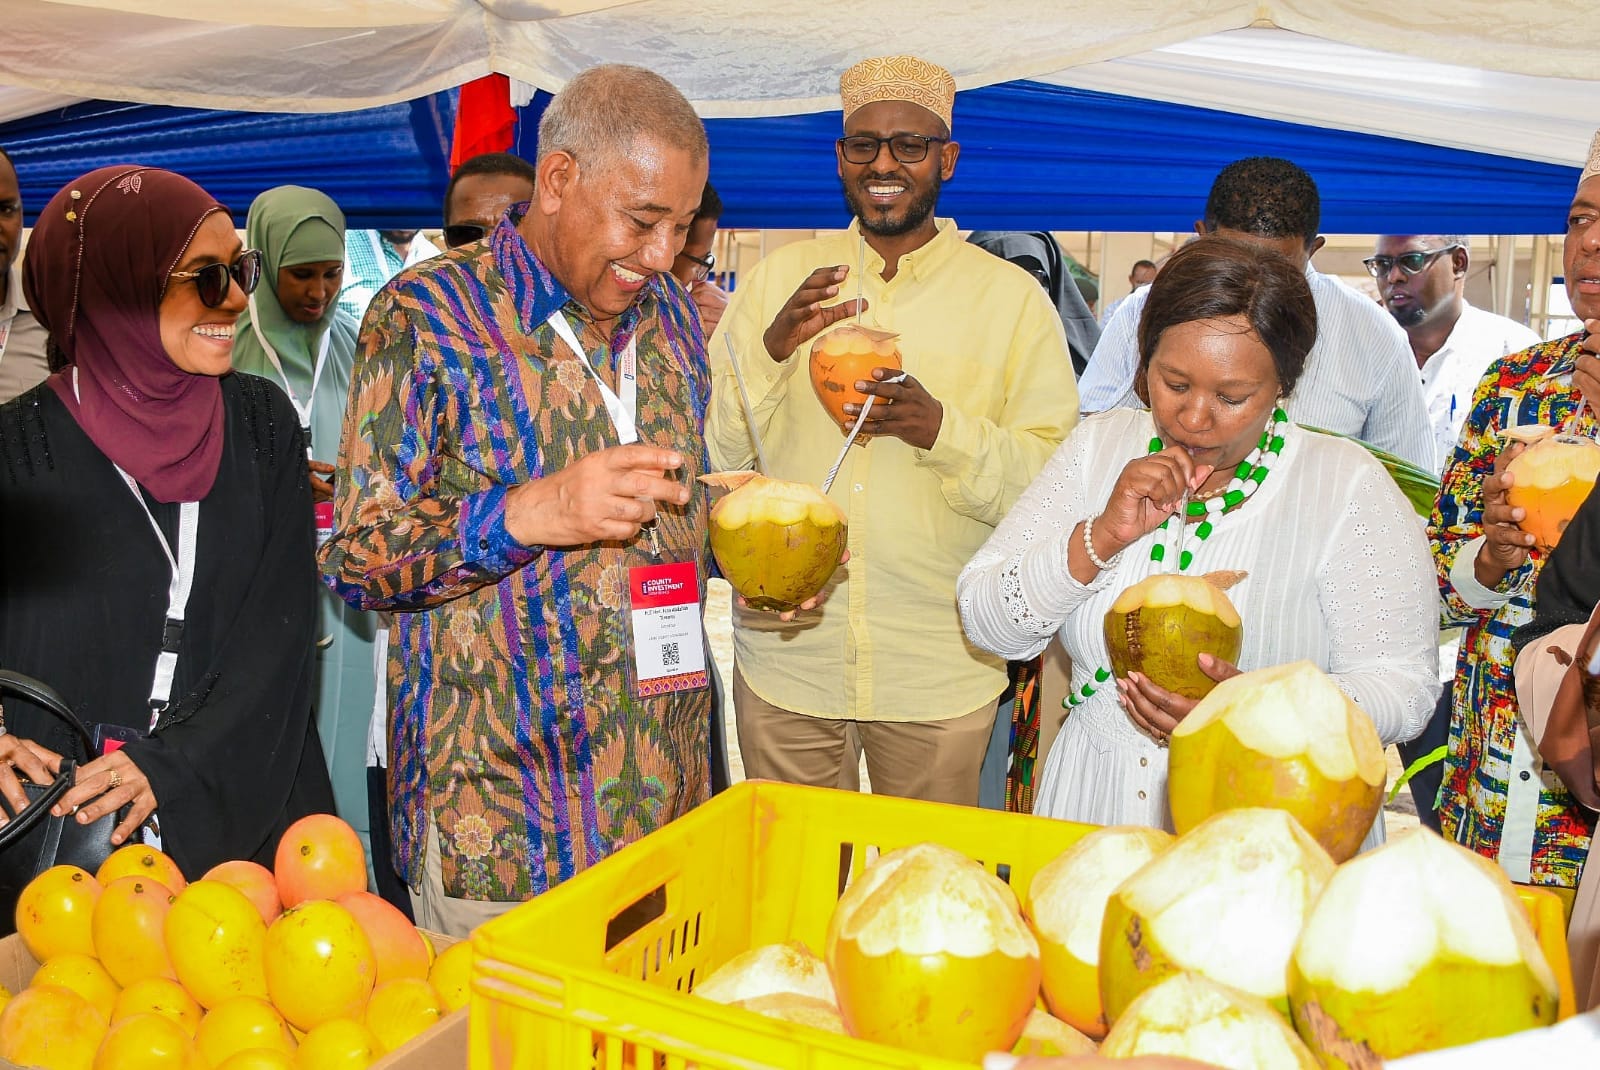 CS MIANO & GOVERNORS’ ENJOYING ‘MADAFU’ WITH A LOCAL SME AT COUNTY INVESTMENT CONFERENCE, LAMU